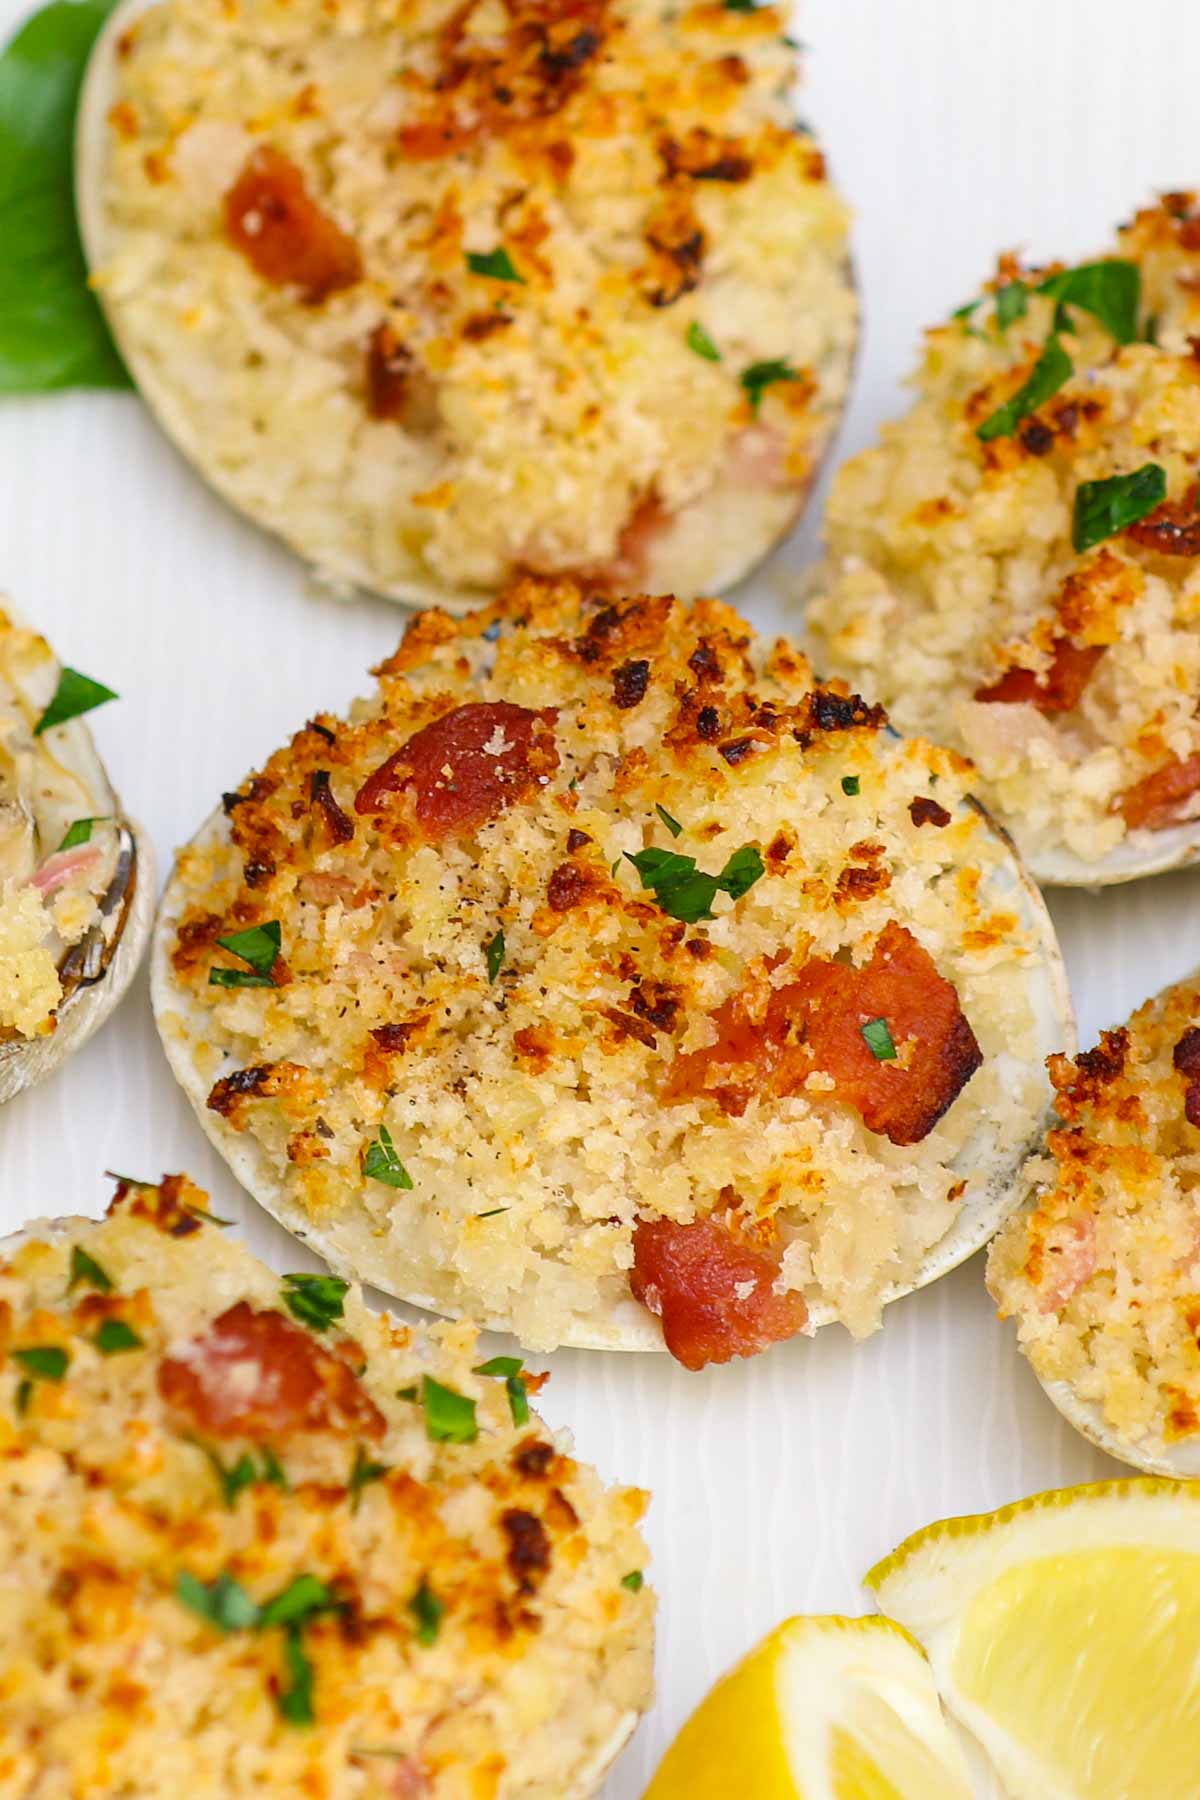 Closeup of clams casino with golden breadcrumbs and crumbed bacon